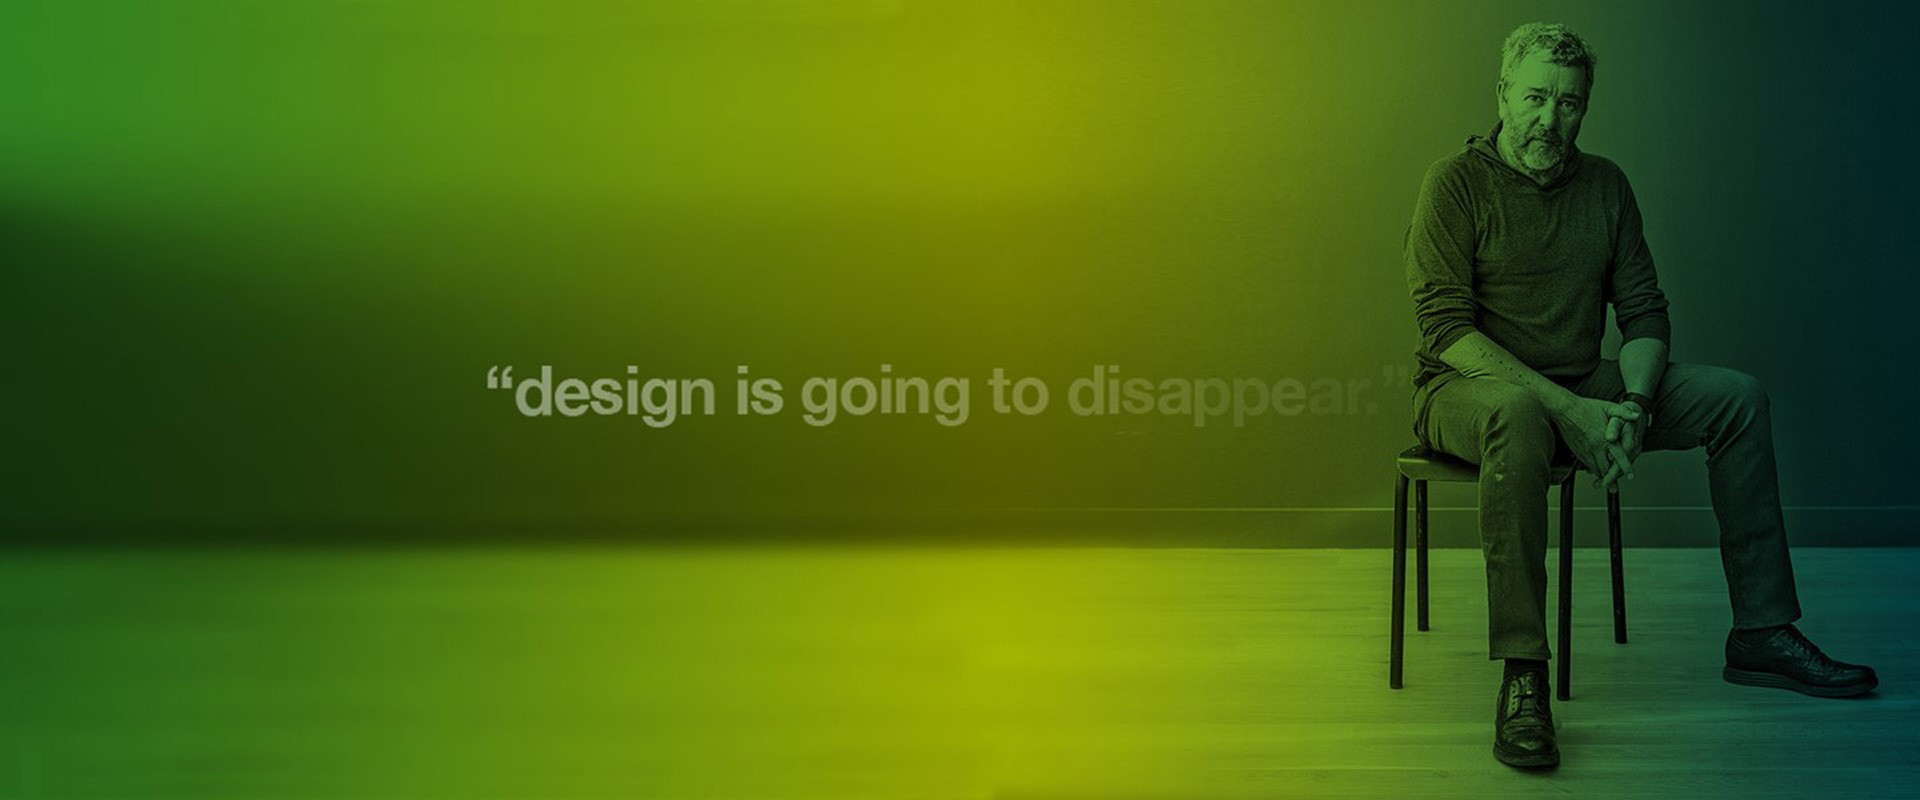 'Design is going to disappear'?